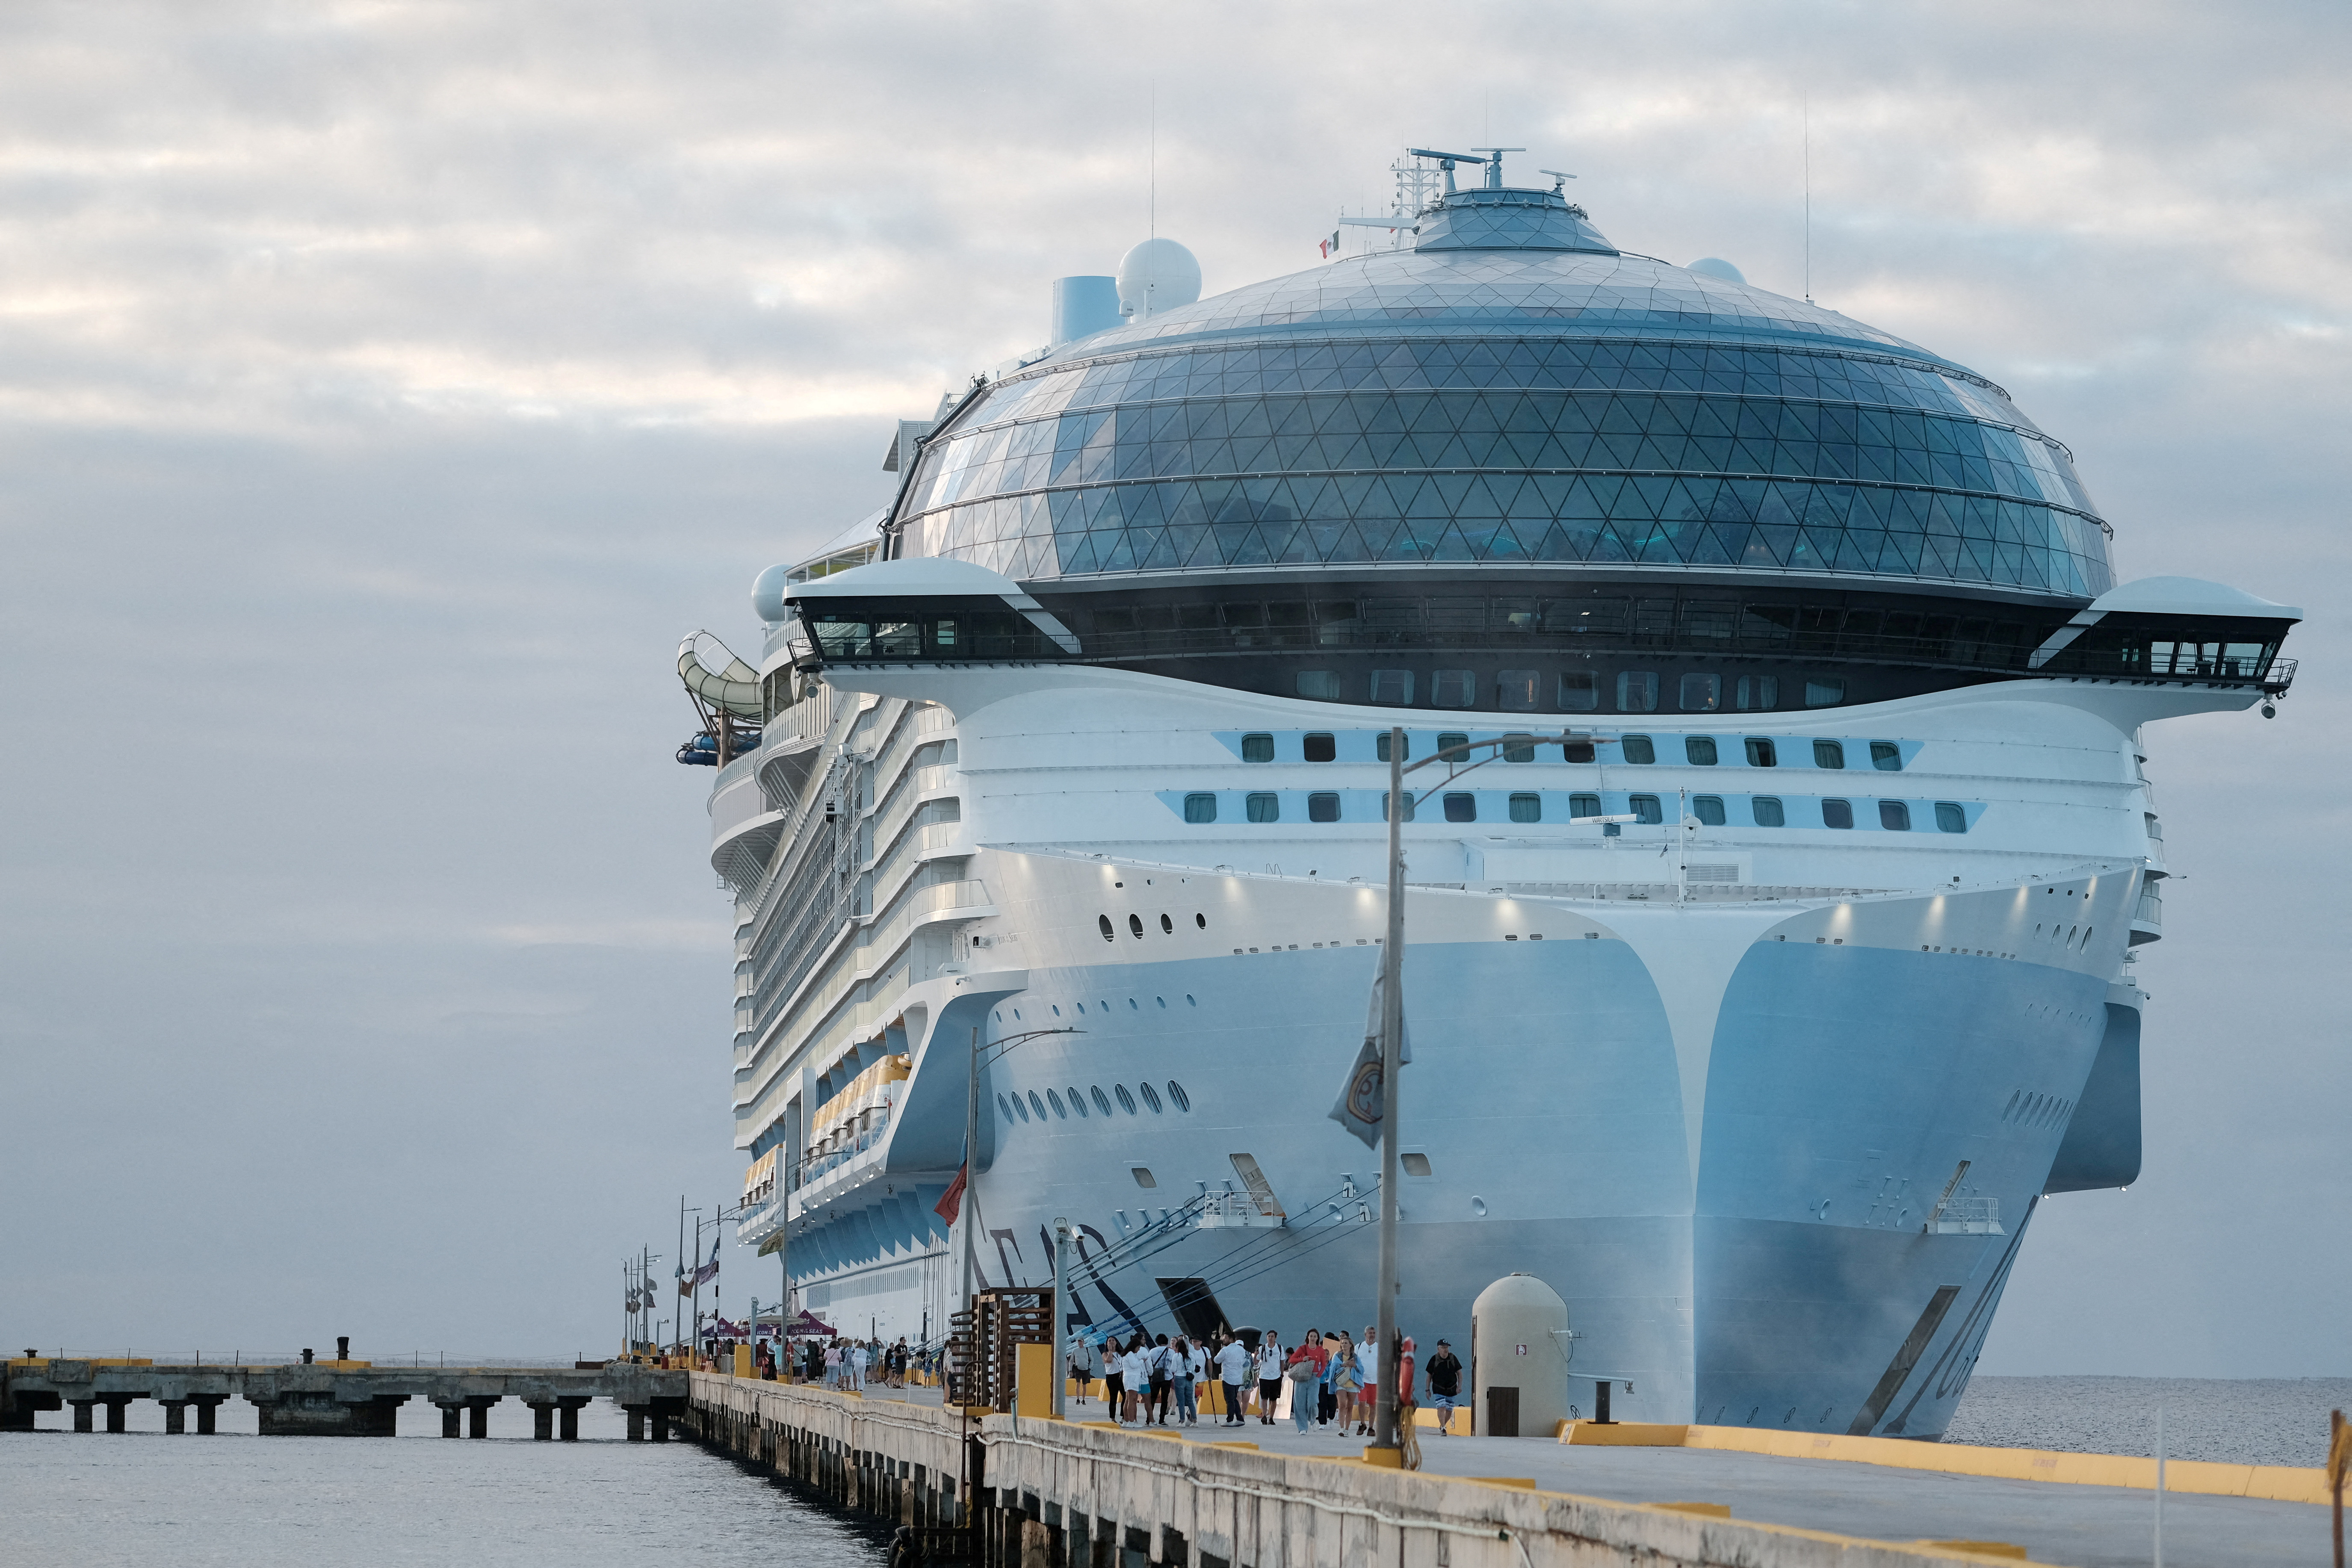 Royal Caribbean's Icon of the Seas, the largest cruise ship in the world, is docked in Mahahual